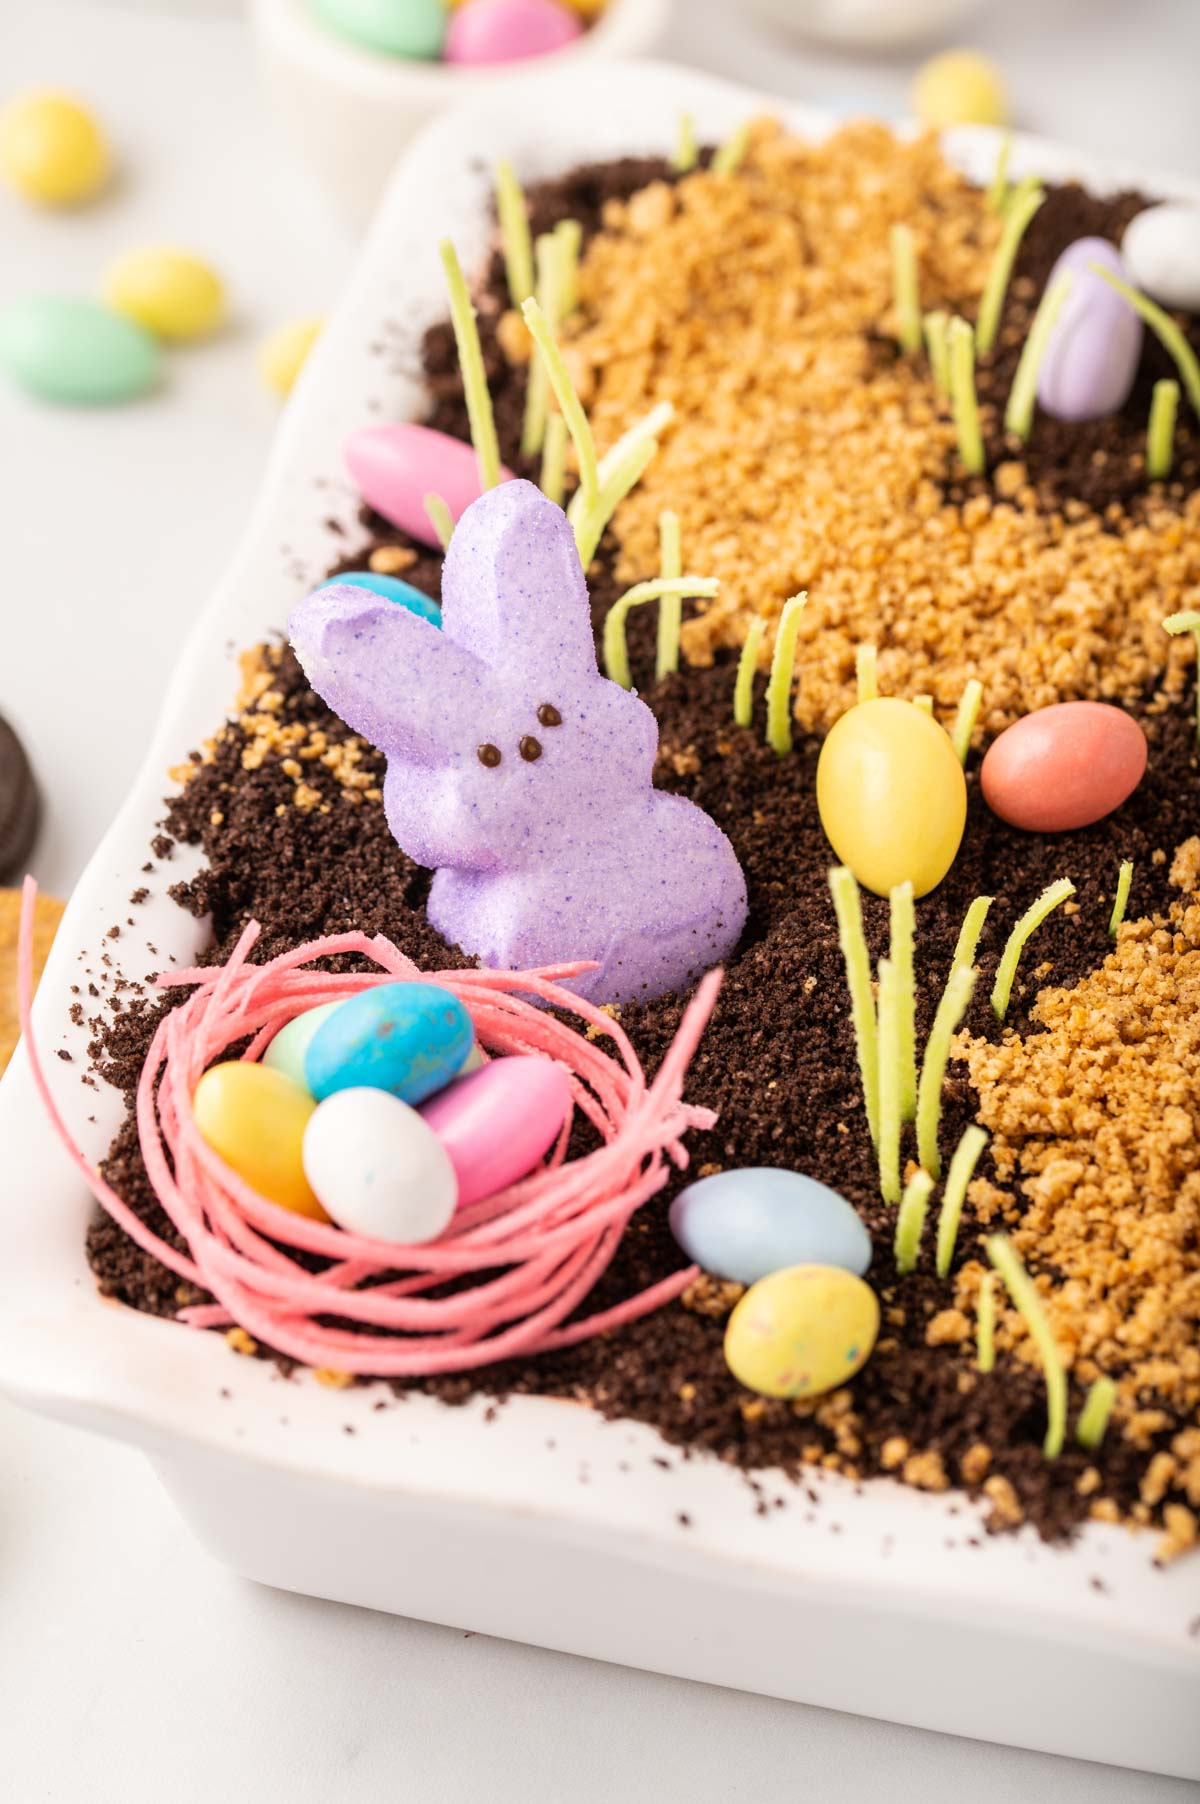 close up of a nest created with edible candy grass with chocolate egg candies inside and a purple Peeps marshmallow bunny sticking out of dirt cake